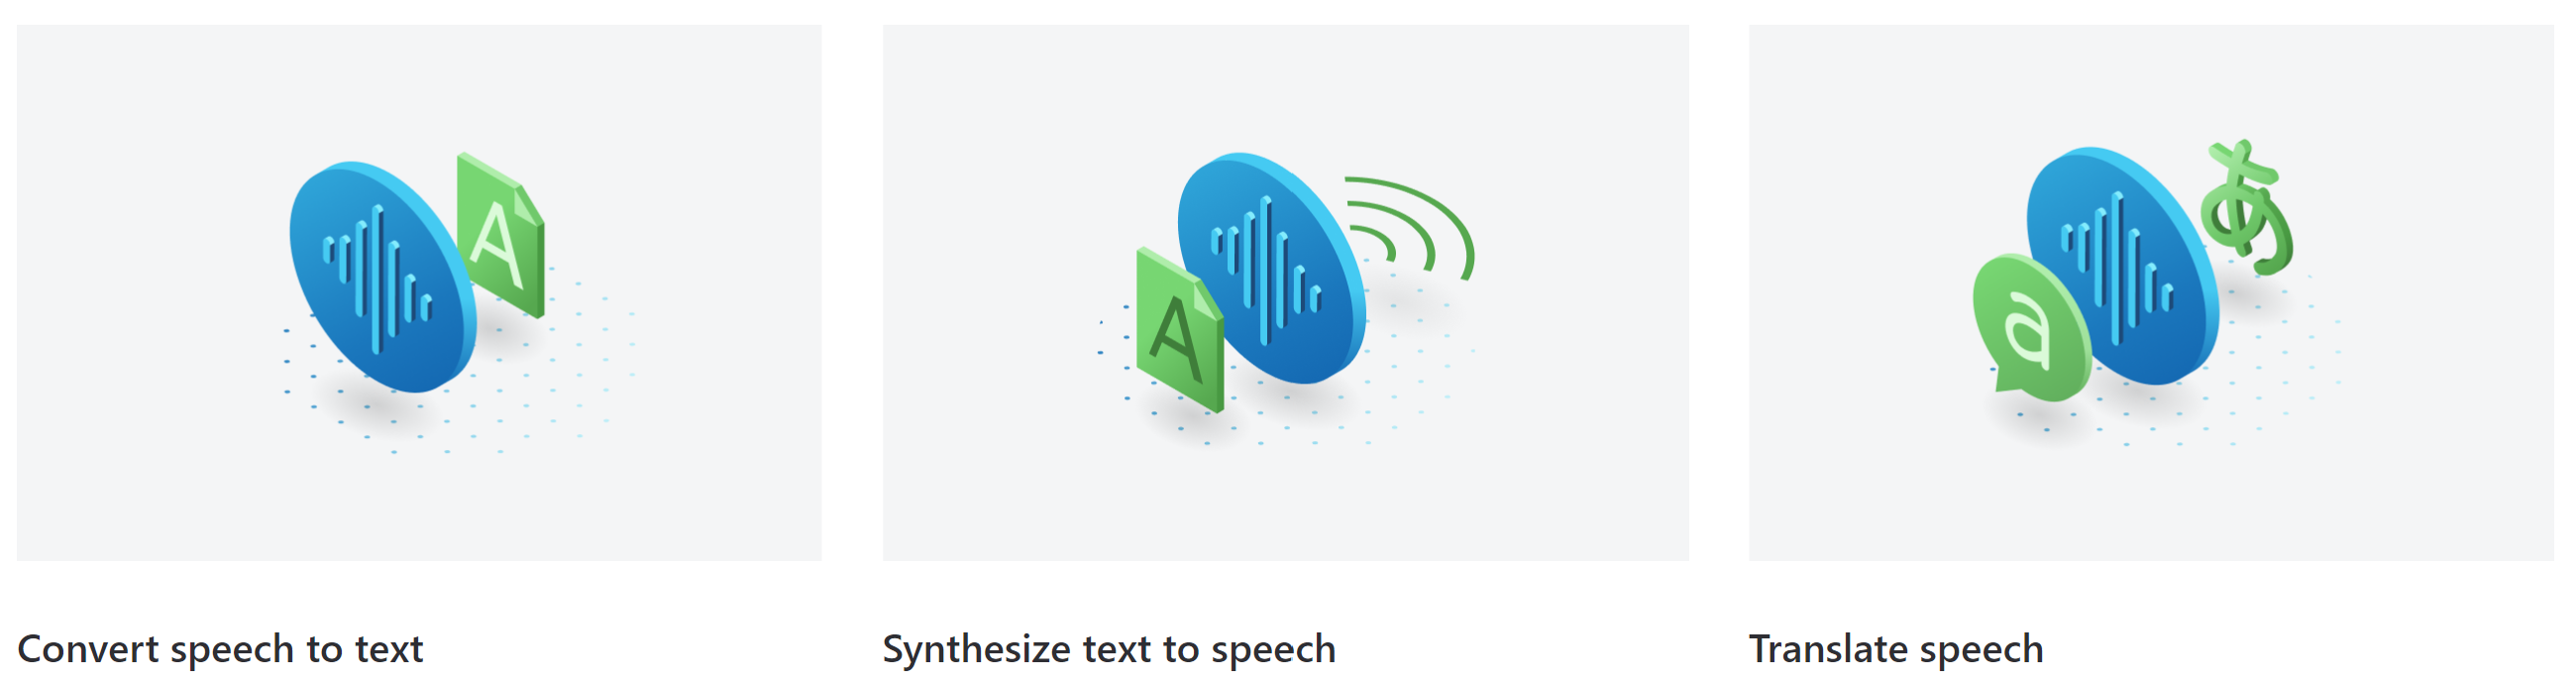 Image of tiles that highlight some Speech service features.